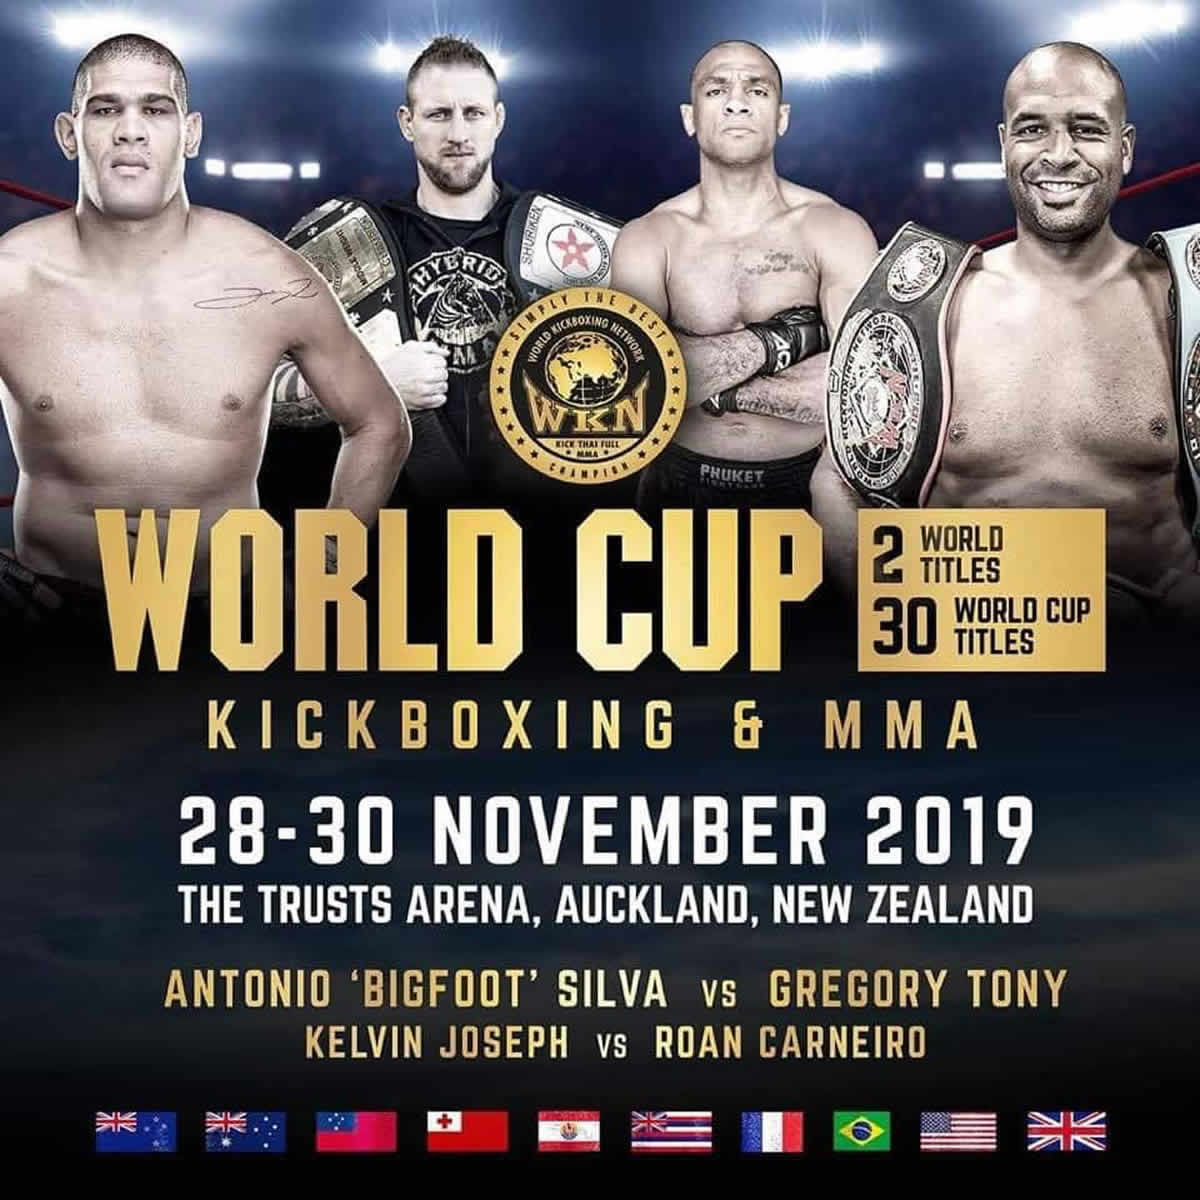 WKN World Cup 2019 in Auckland, NZ Welcomes Amateur Fighters -